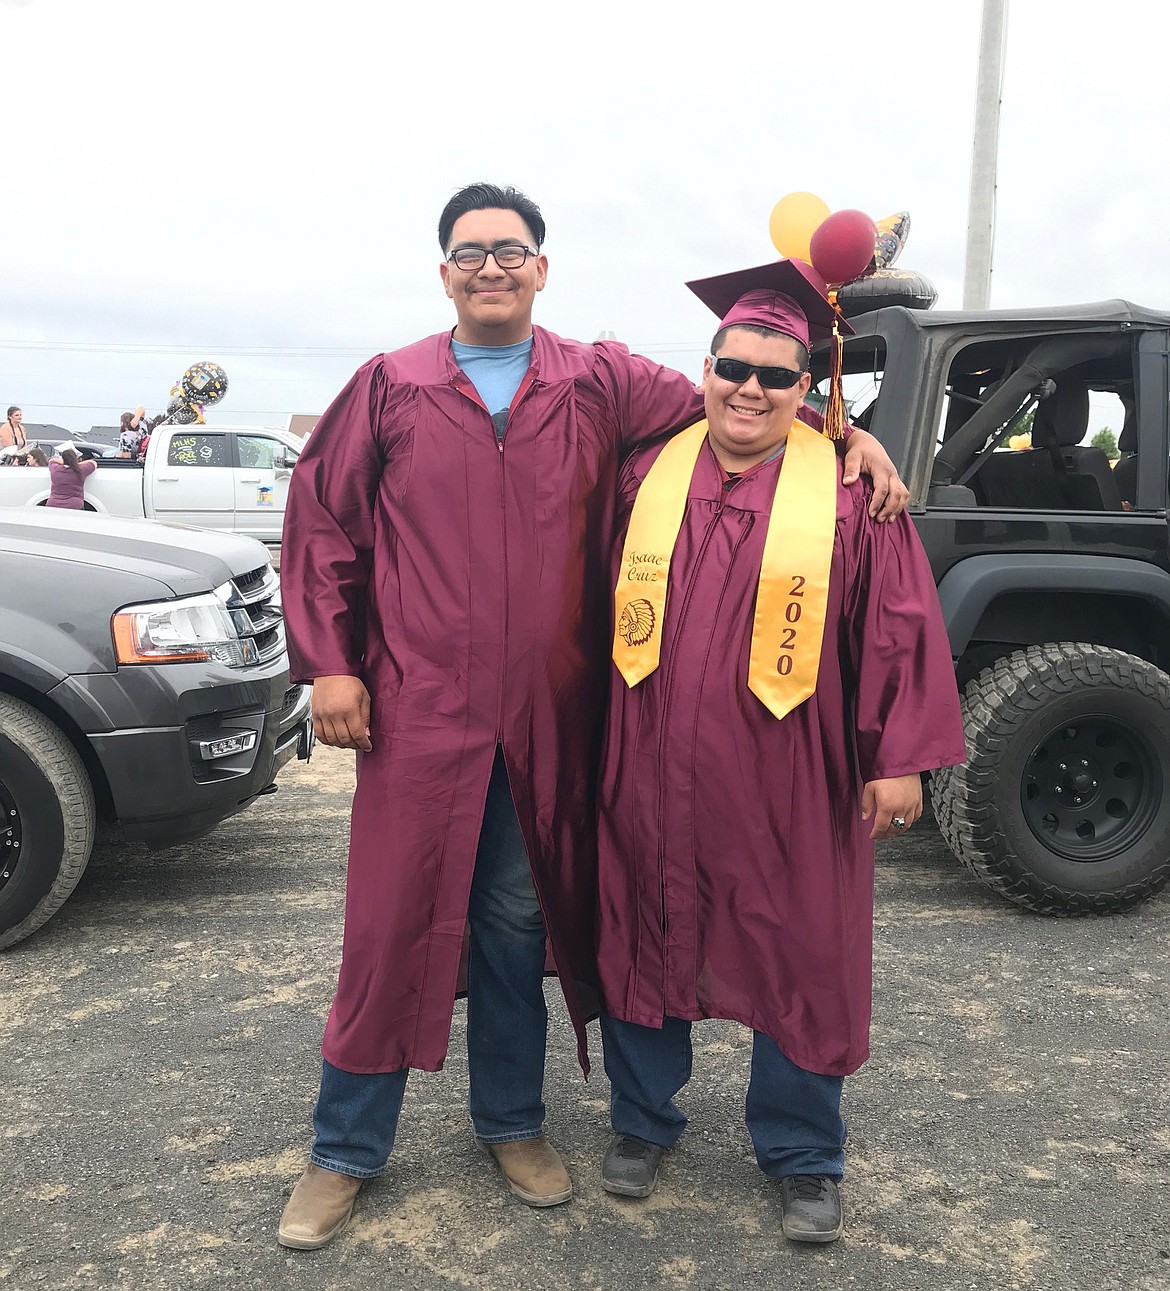 Courtesy photo
The unique circumstances of the 2020 Moses Lake High School graduation didn't stop students and families from enjoying the day.